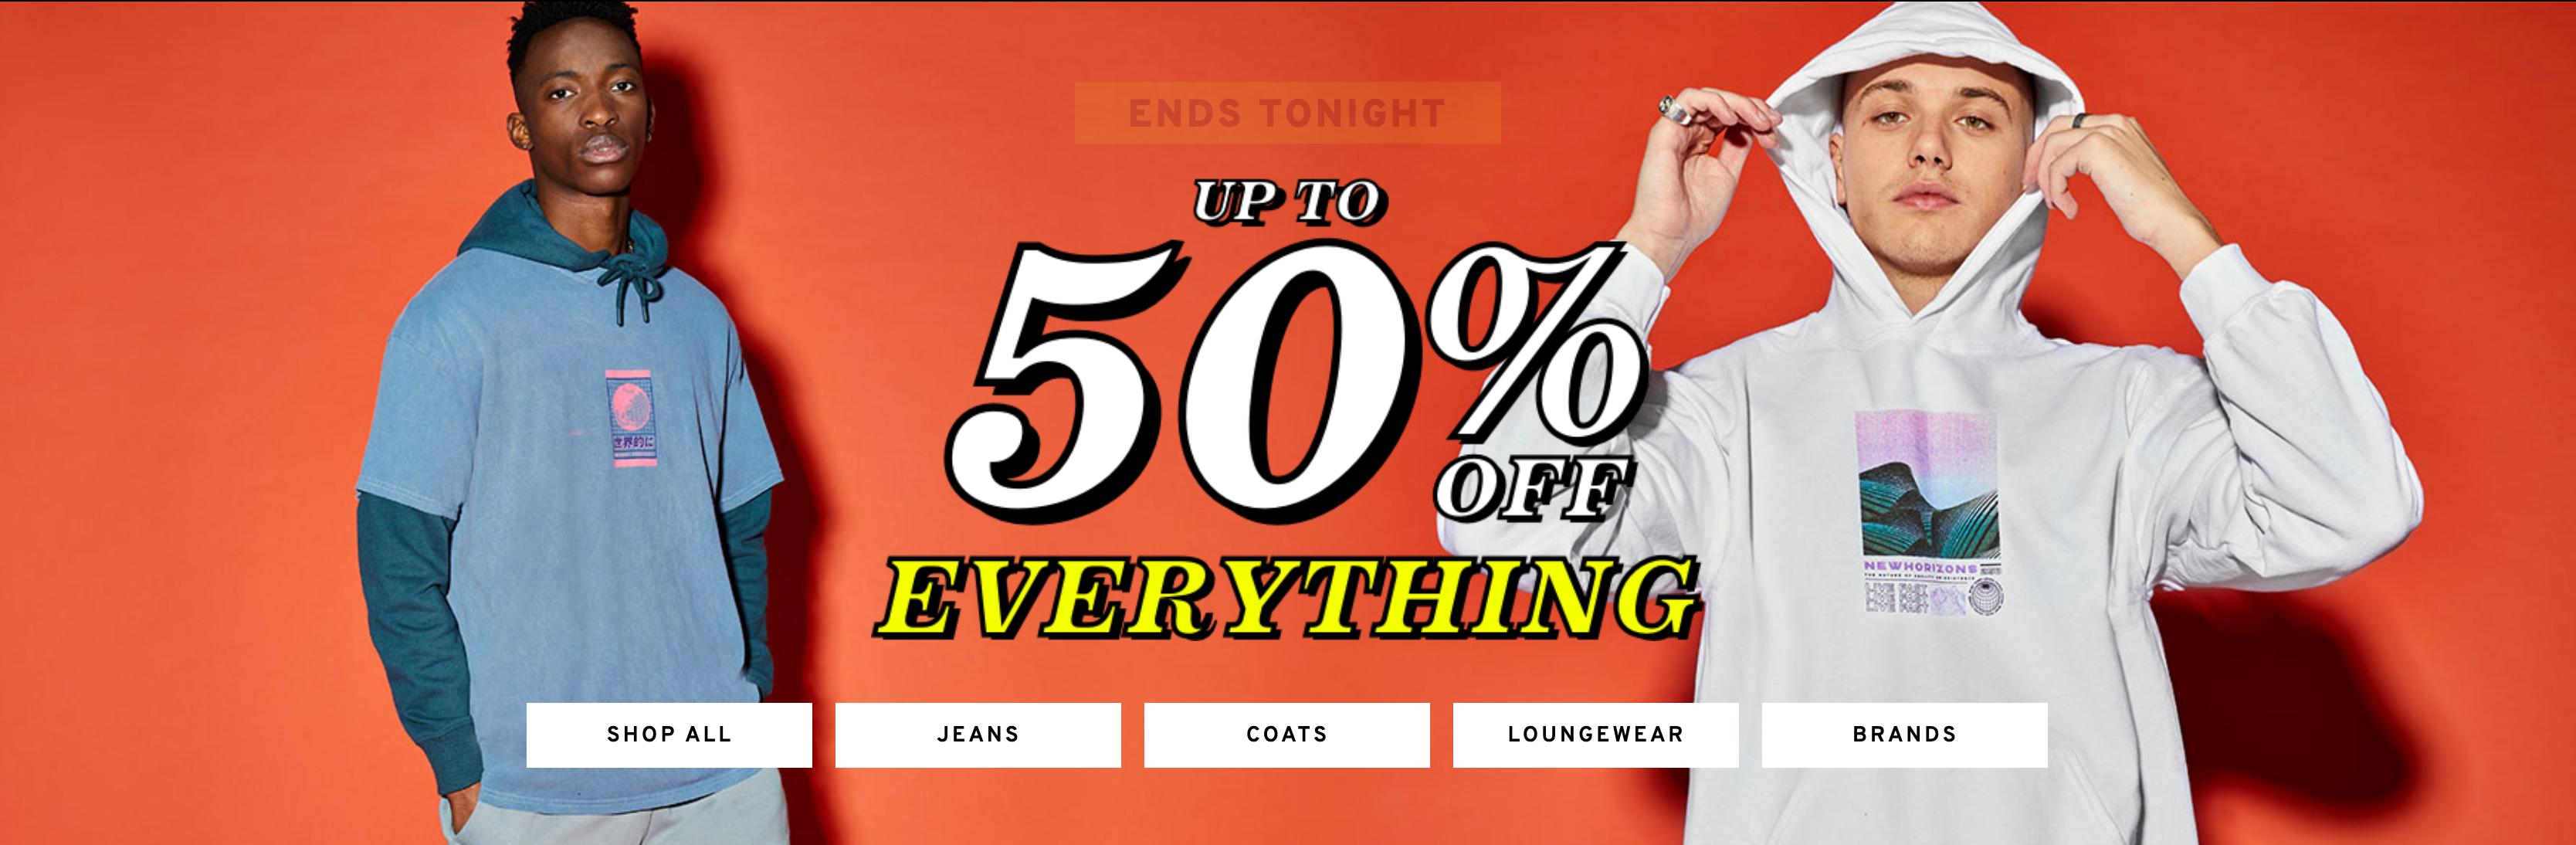 Topman: Sale up to 50% off mens fashion